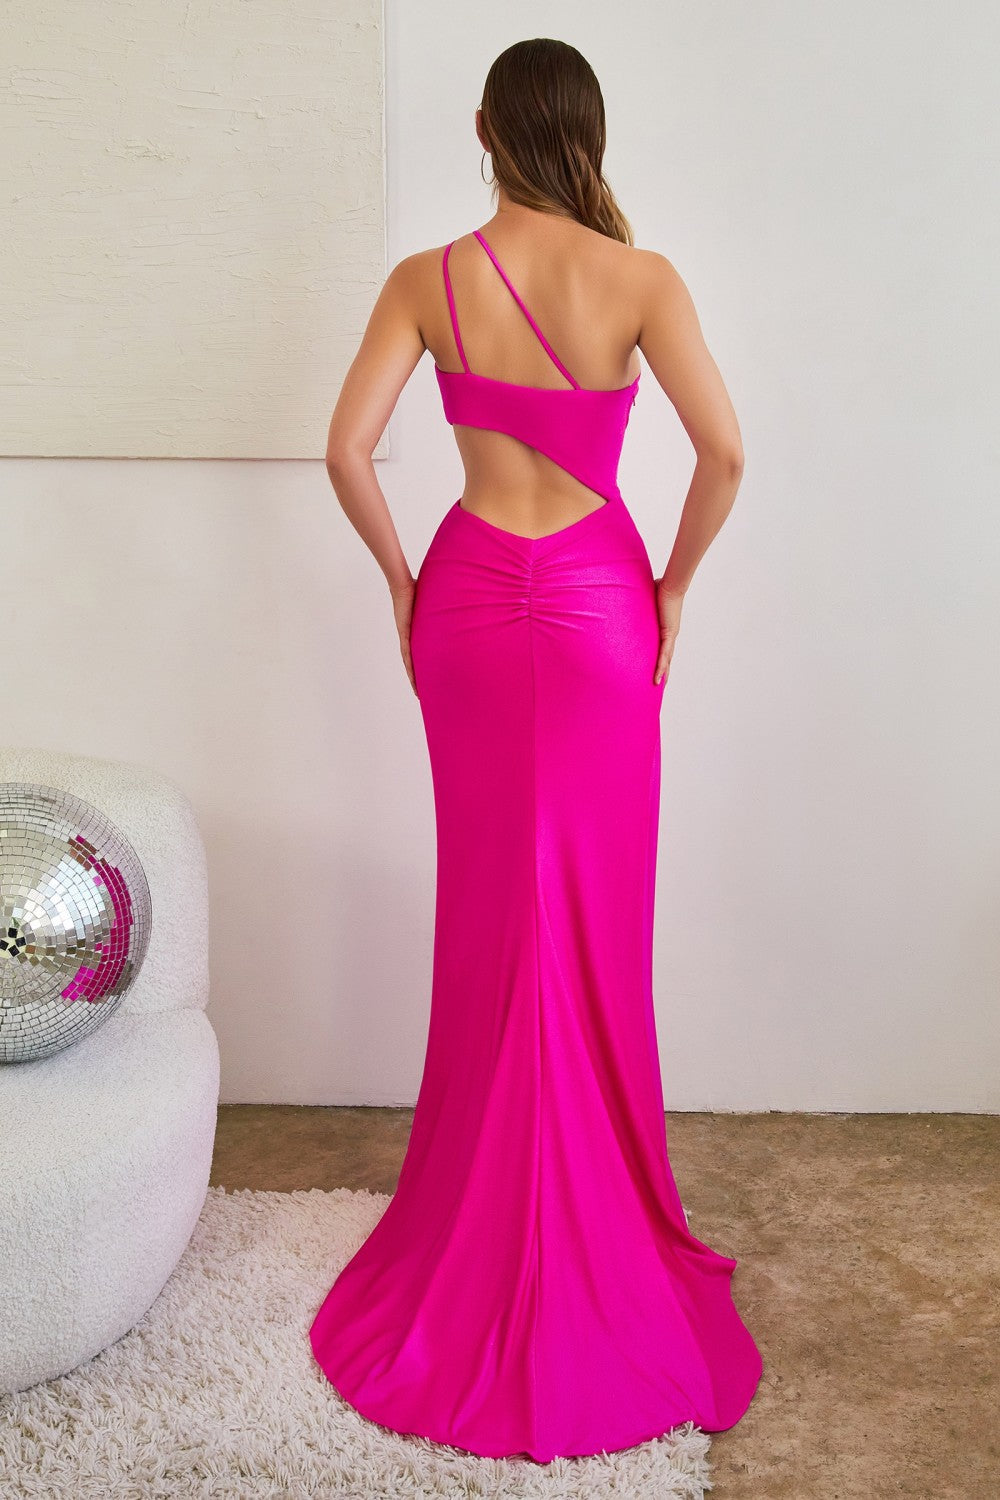 Sexy Fitted Prom & Bridesmaid Gown Sensual Plunging Keyhole Mid Open Cross Back Bodice Gala Nigth Evening Luxury Glitter Dress CDCD887 Elsy Style Evening Dress